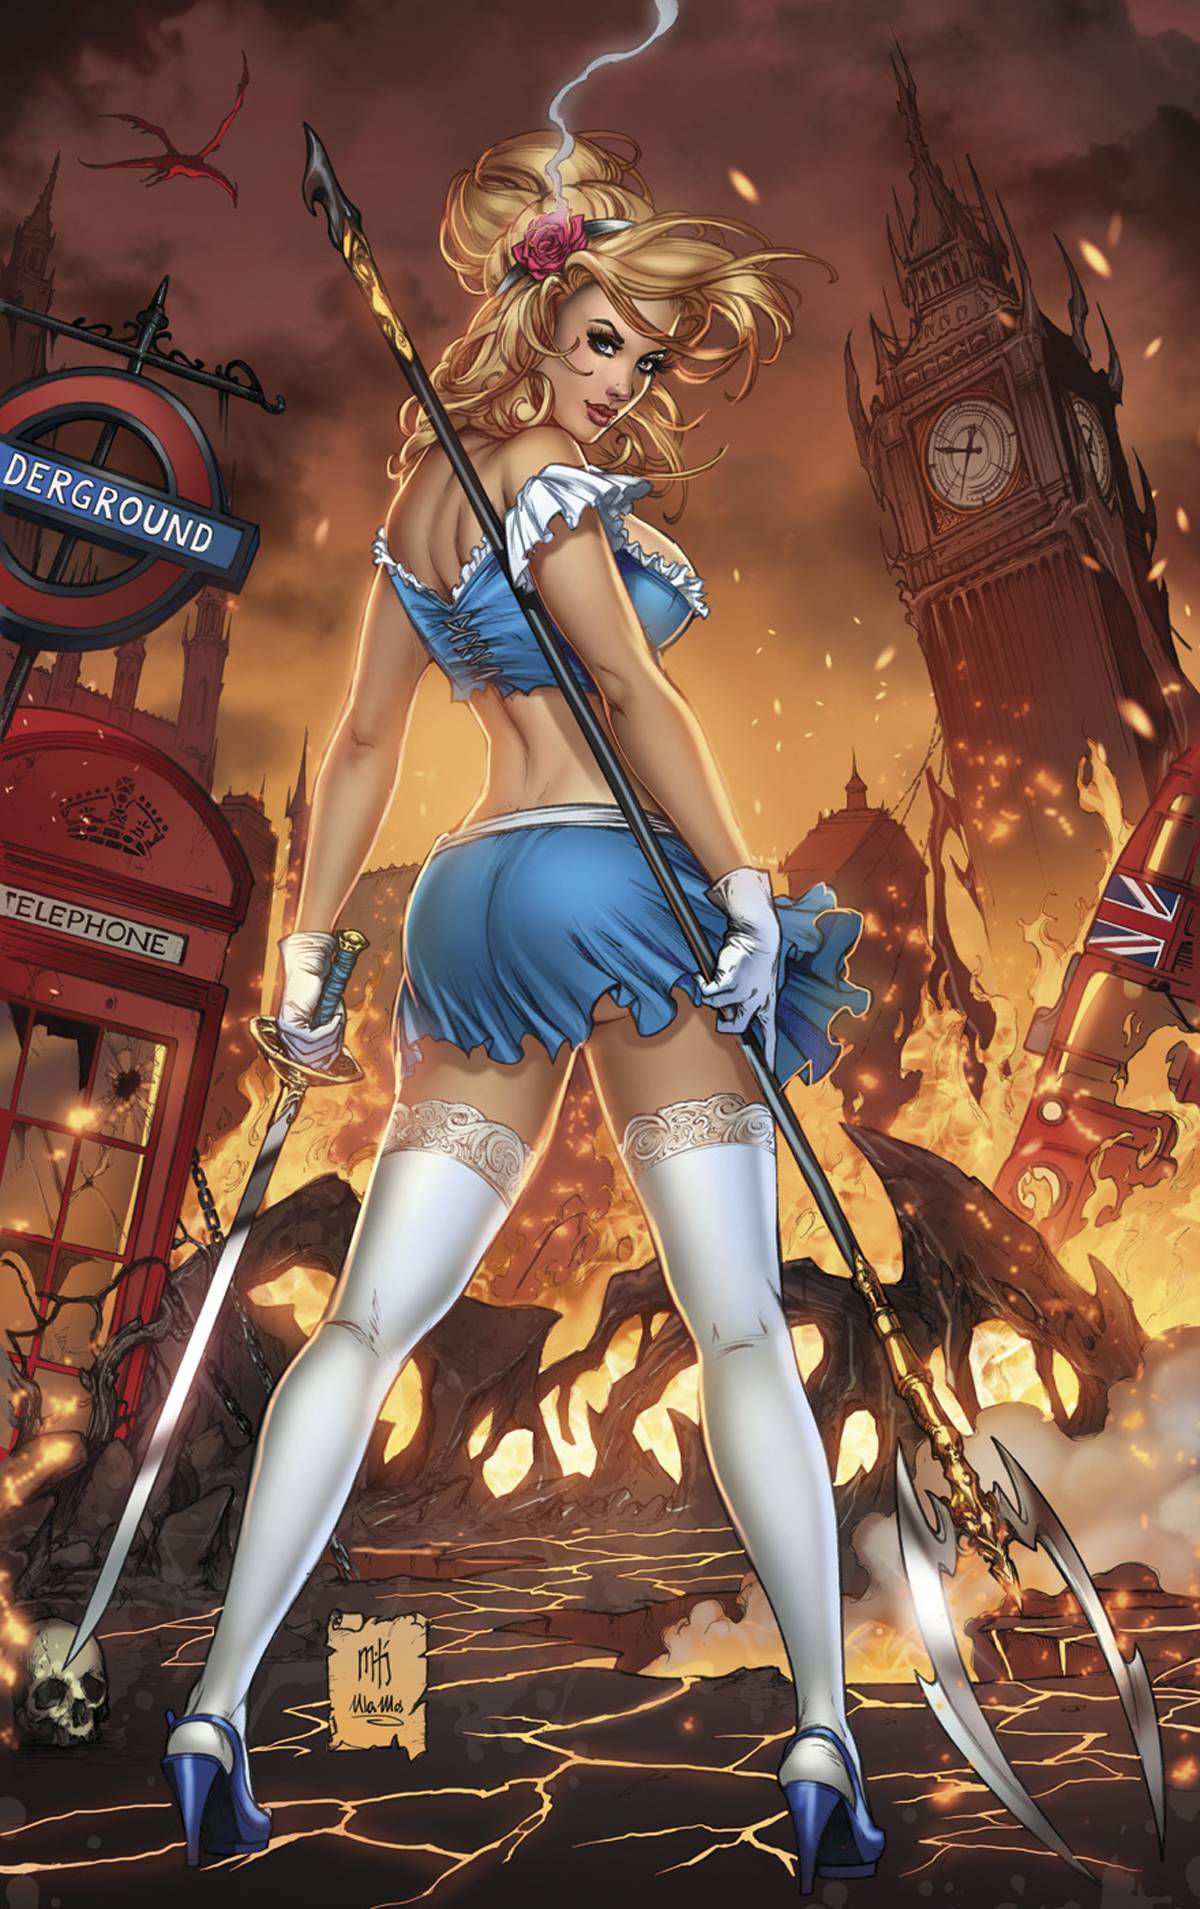 Grimm Fairy Tales: Bad Grils #2